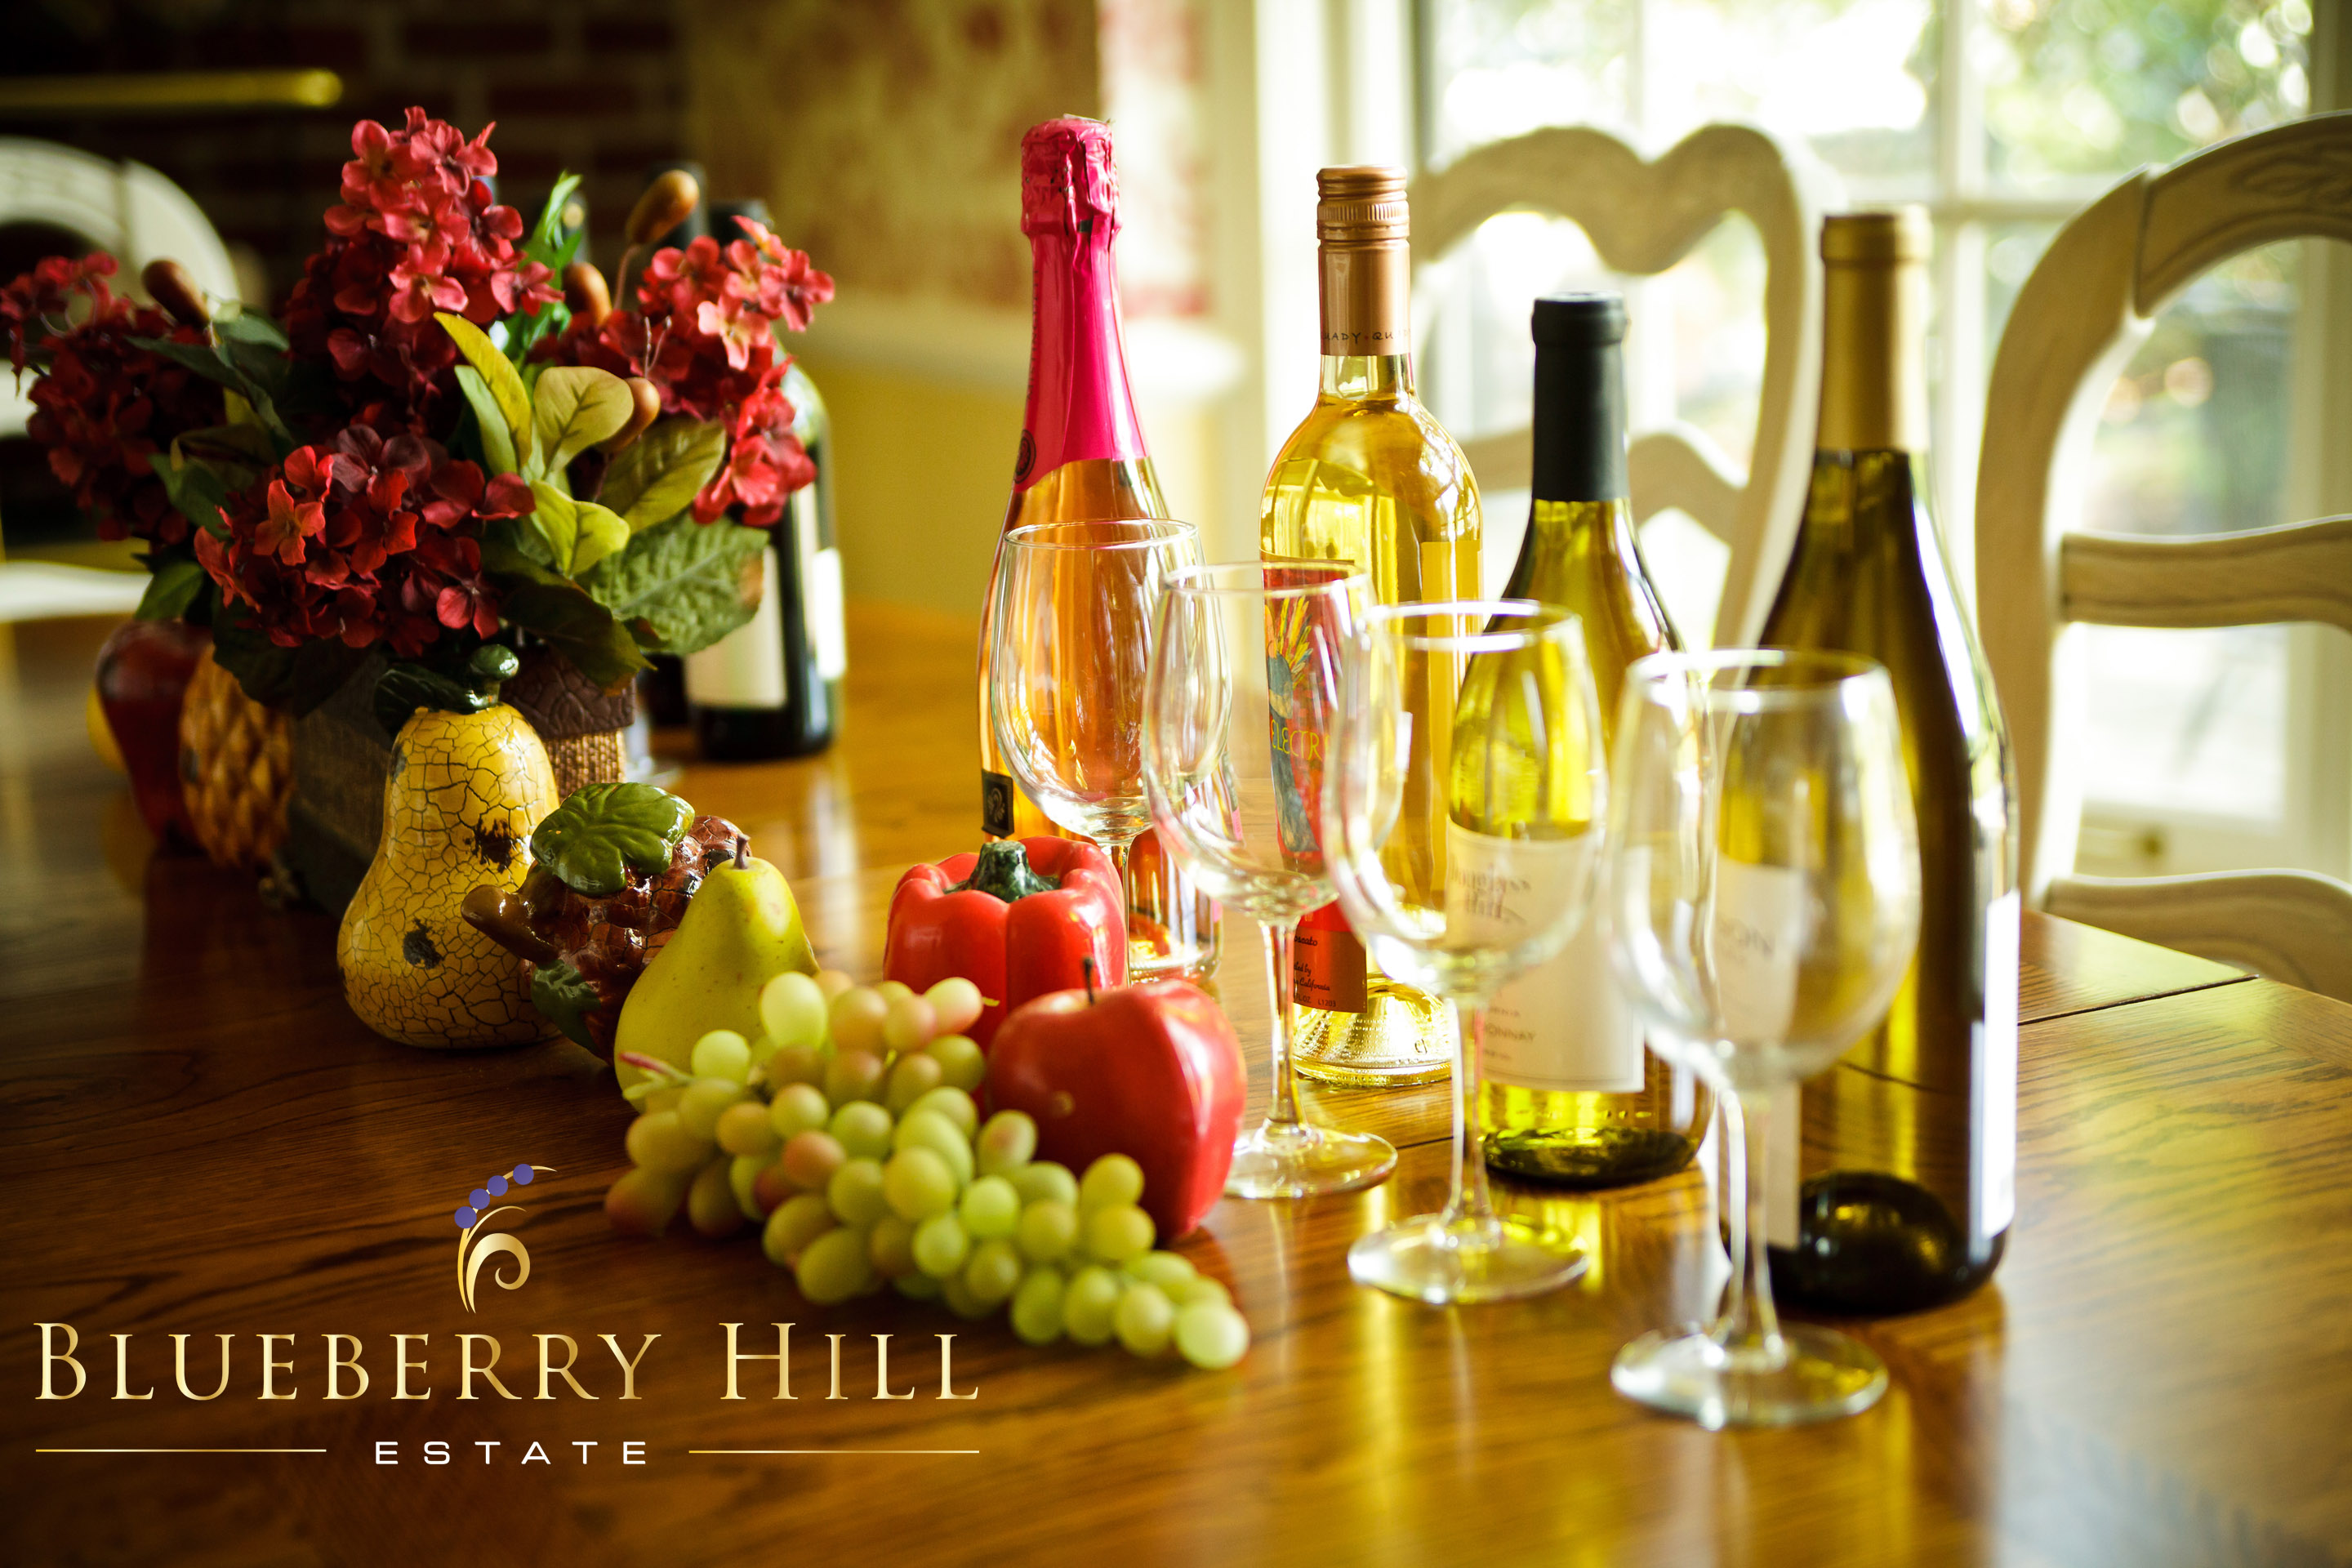 The Blueberry Hill Estate wine pairing experience is unlike any other.